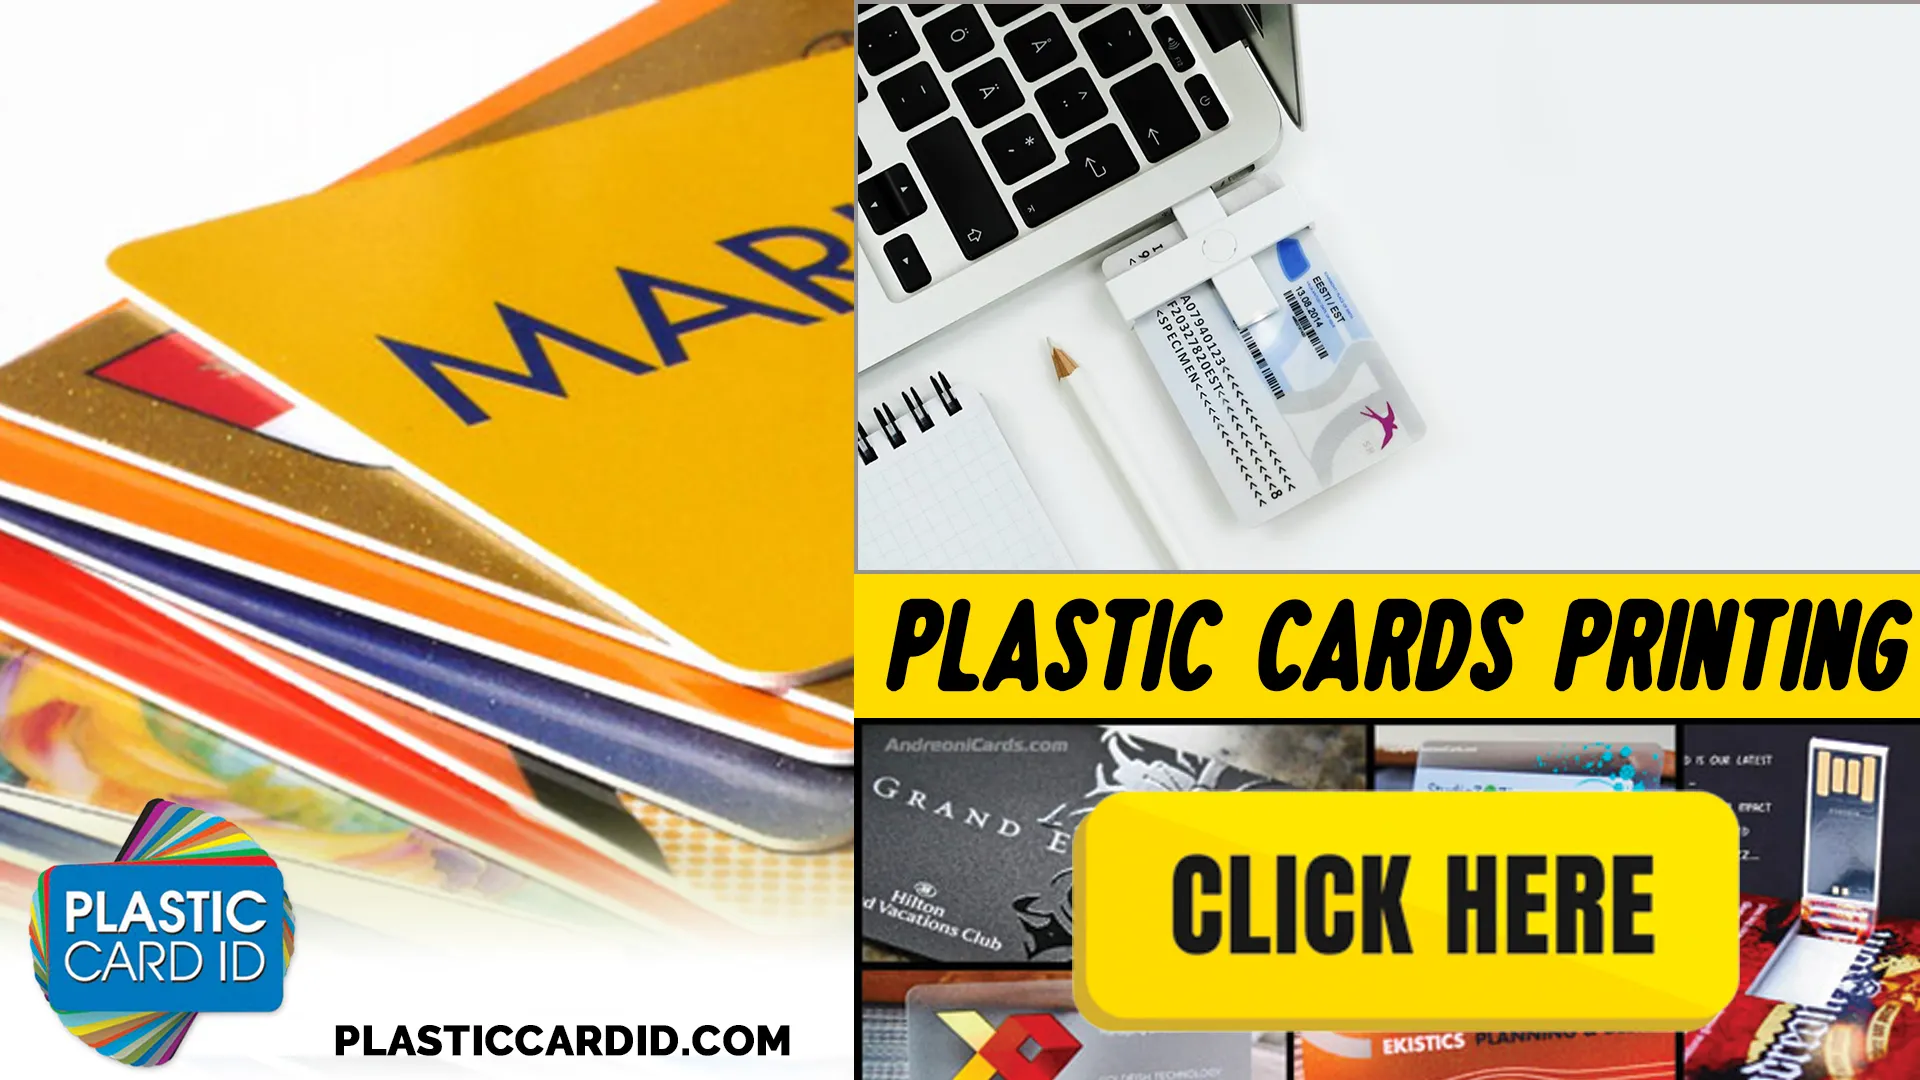 Your National Provider of Comprehensive Card Solutions